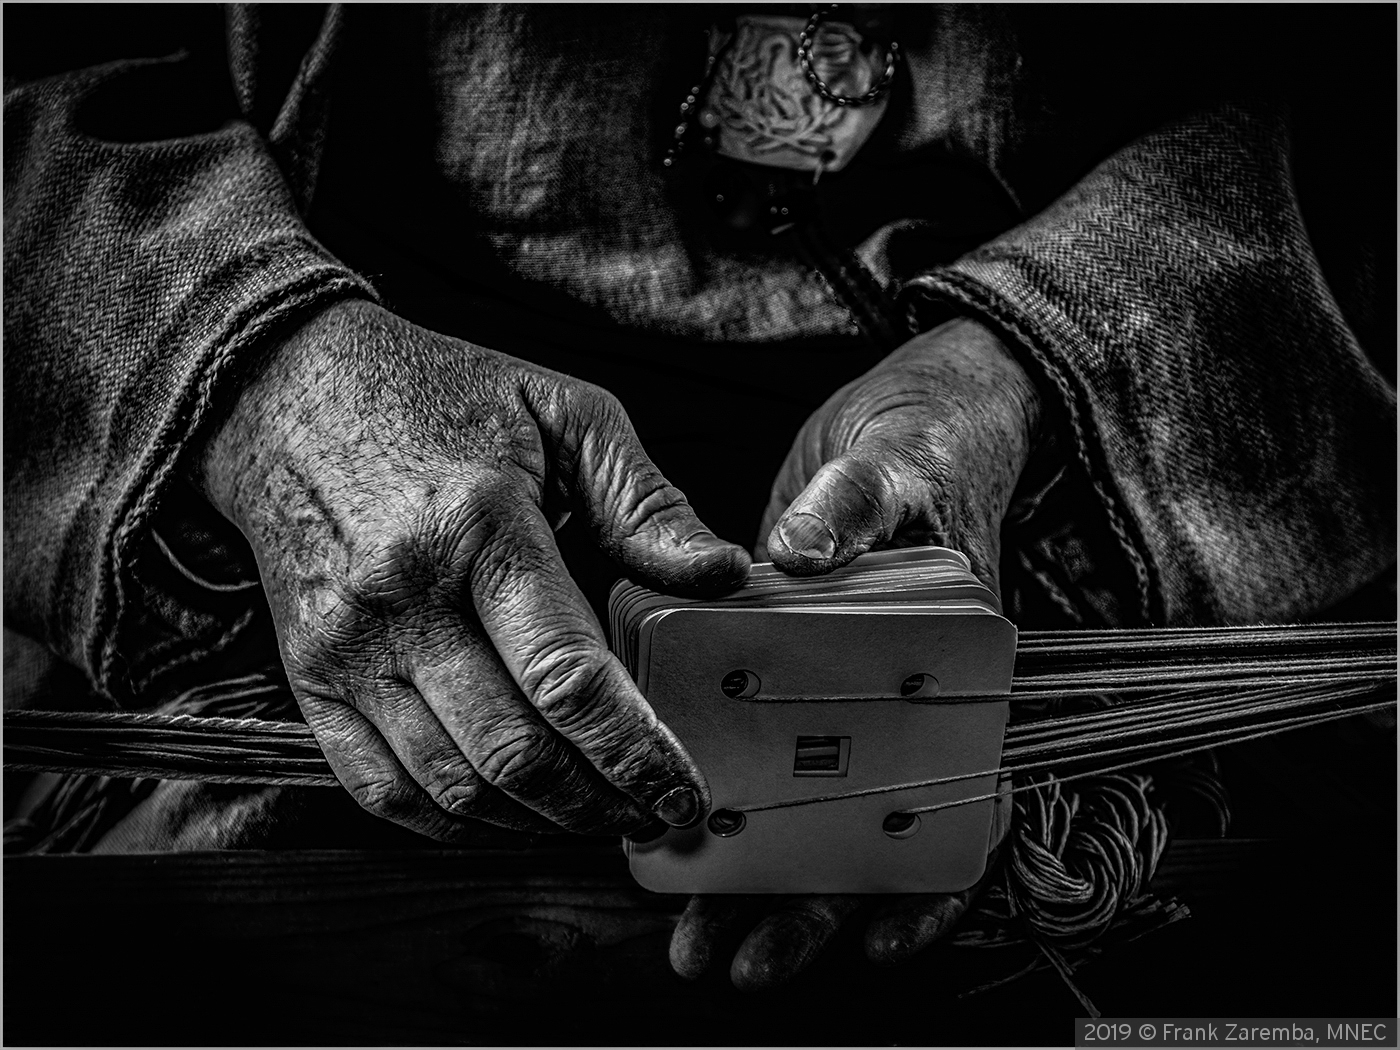 Hands of the Weaver by Frank Zaremba, MNEC